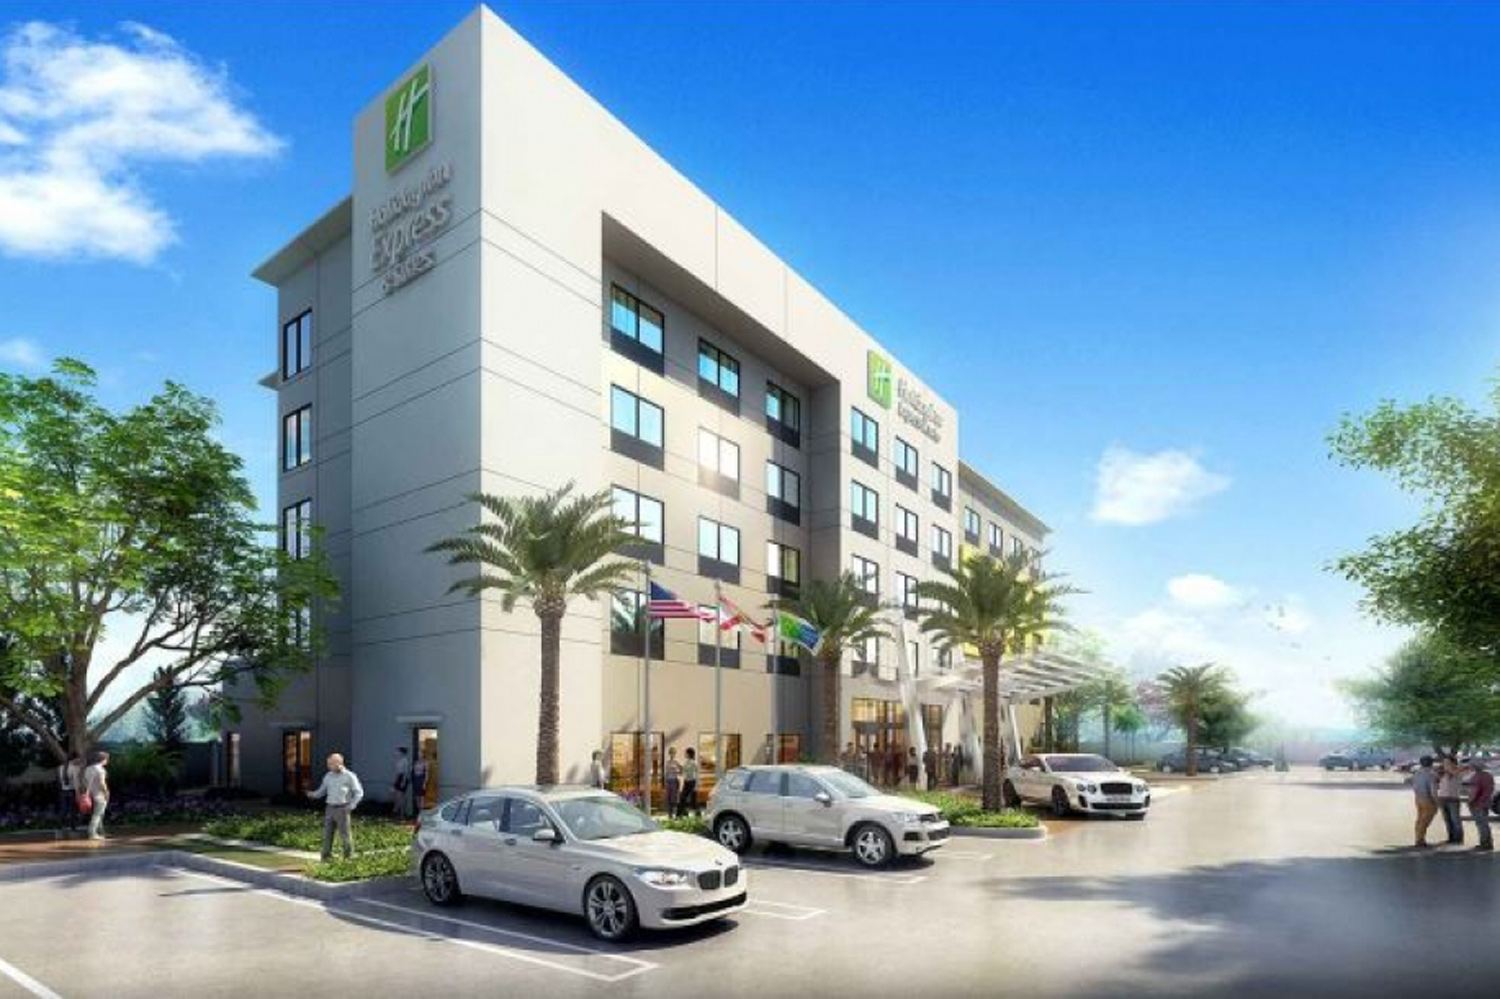 Holiday Inn Express Hotel in Doral Rendering